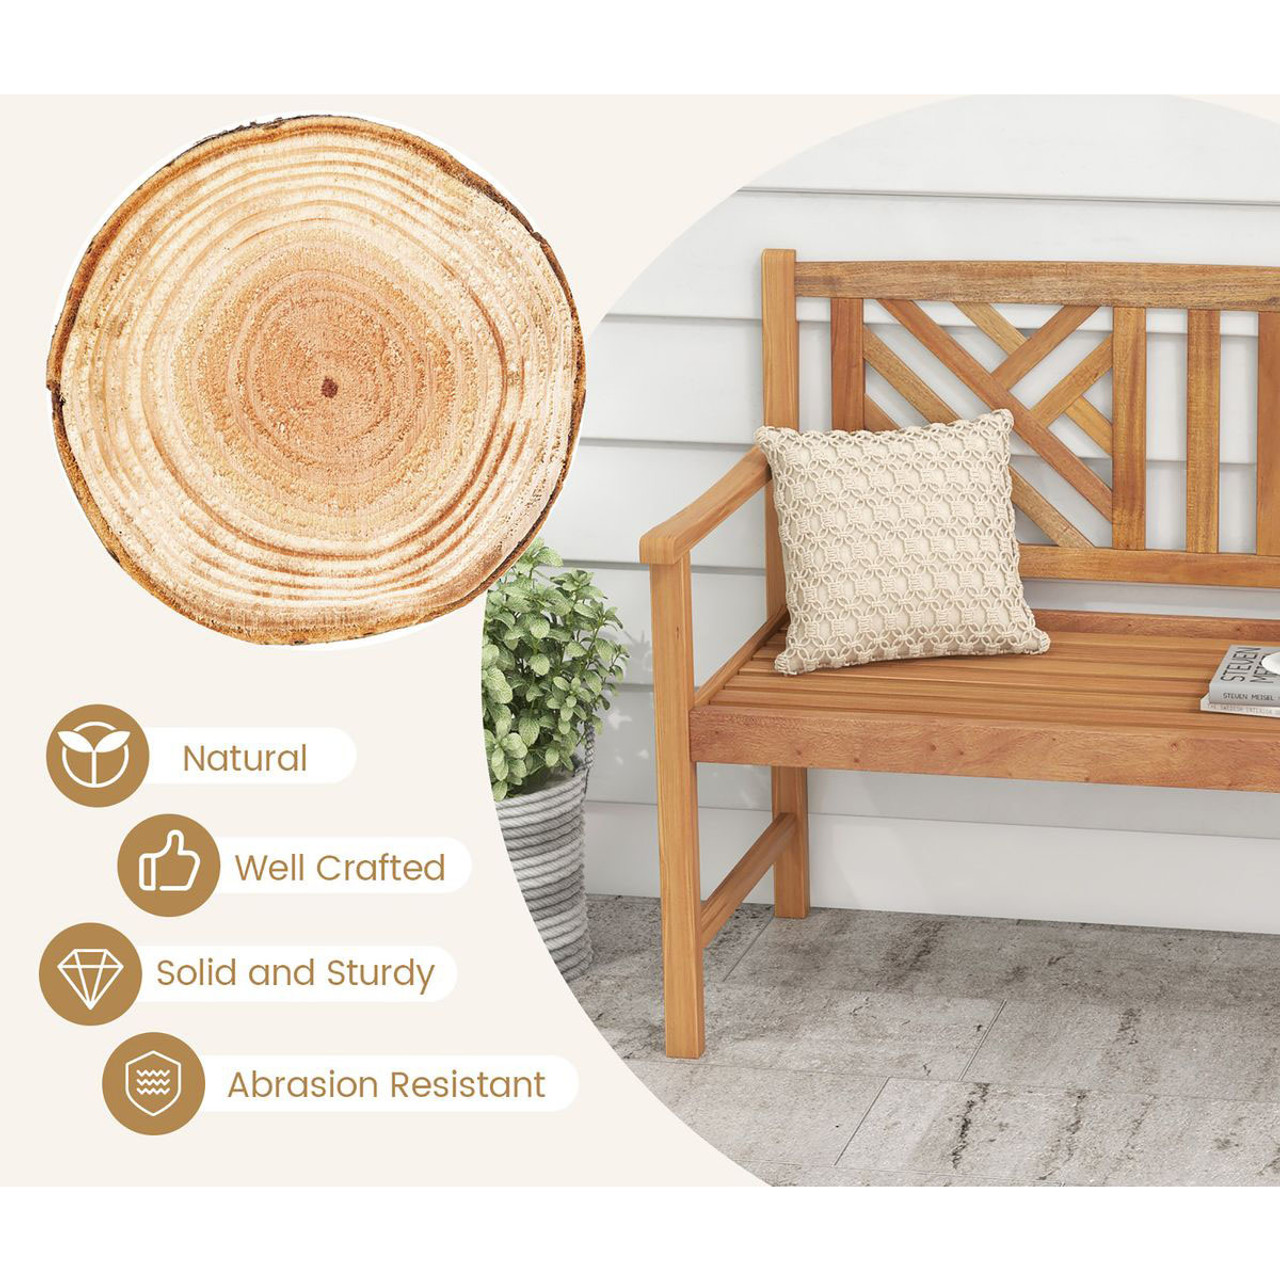 2-Person Acacia Wood Outdoor Slatted Bench product image